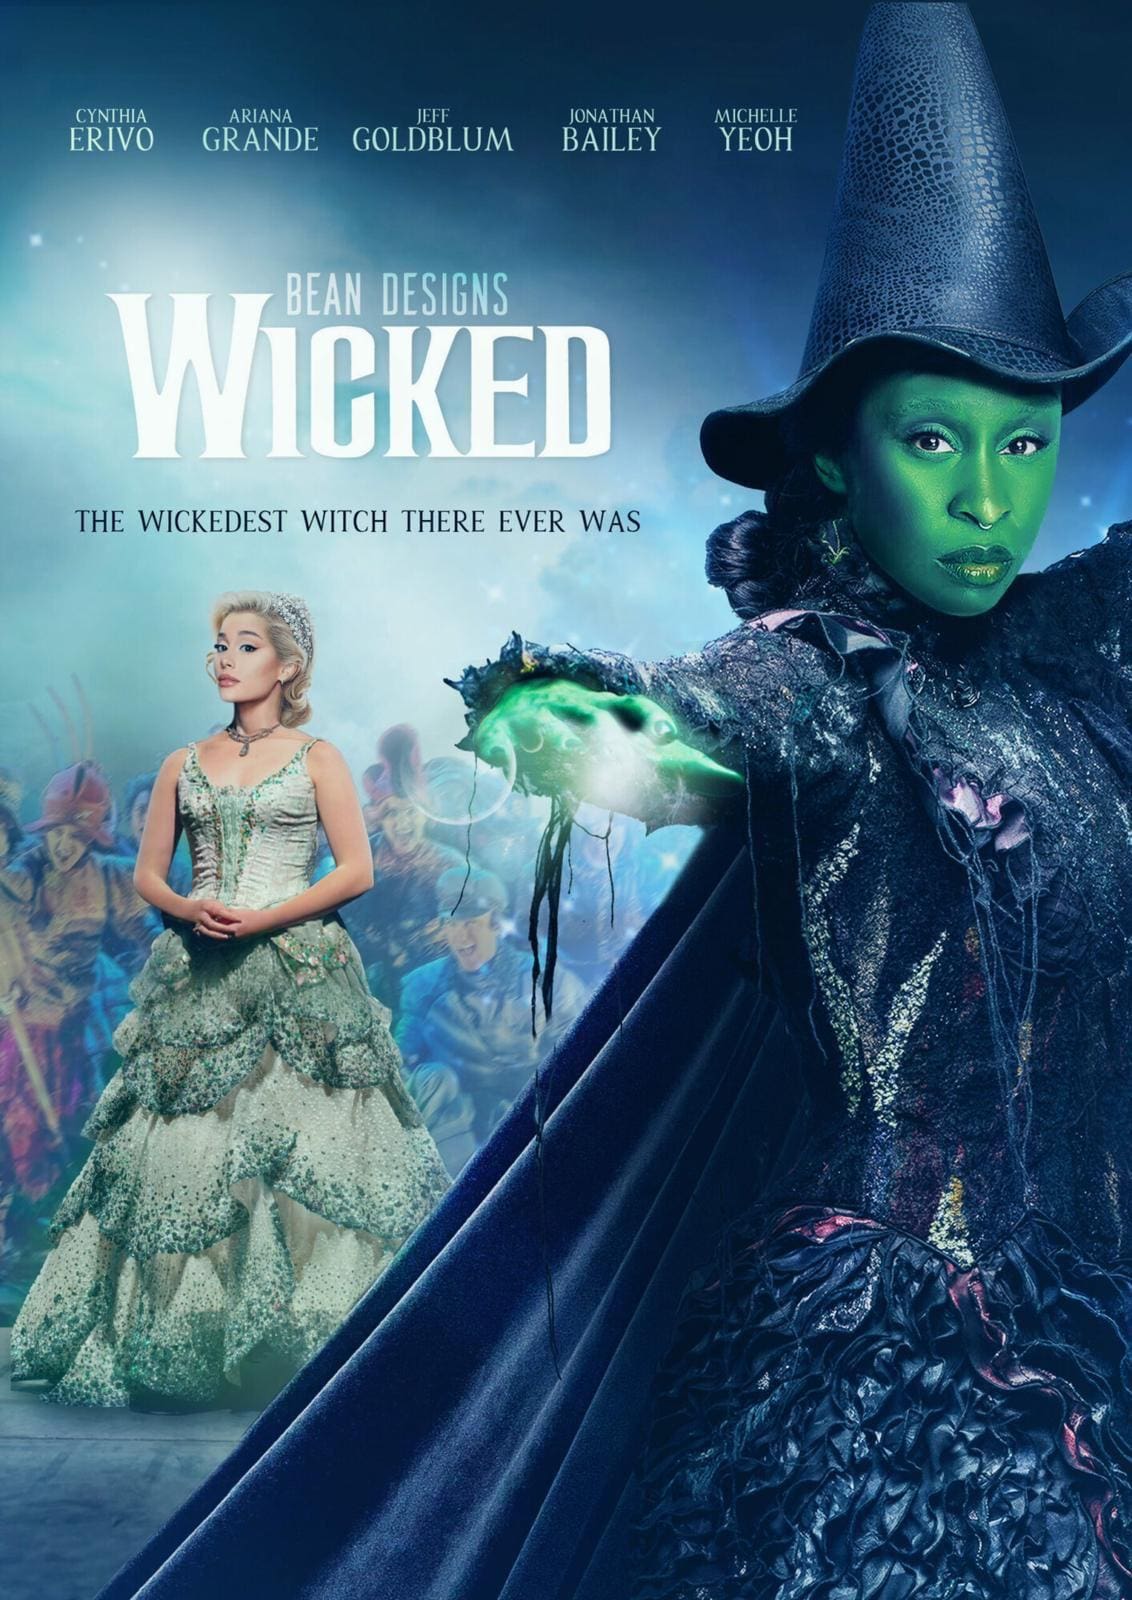 Promotional image of Wicked the musical